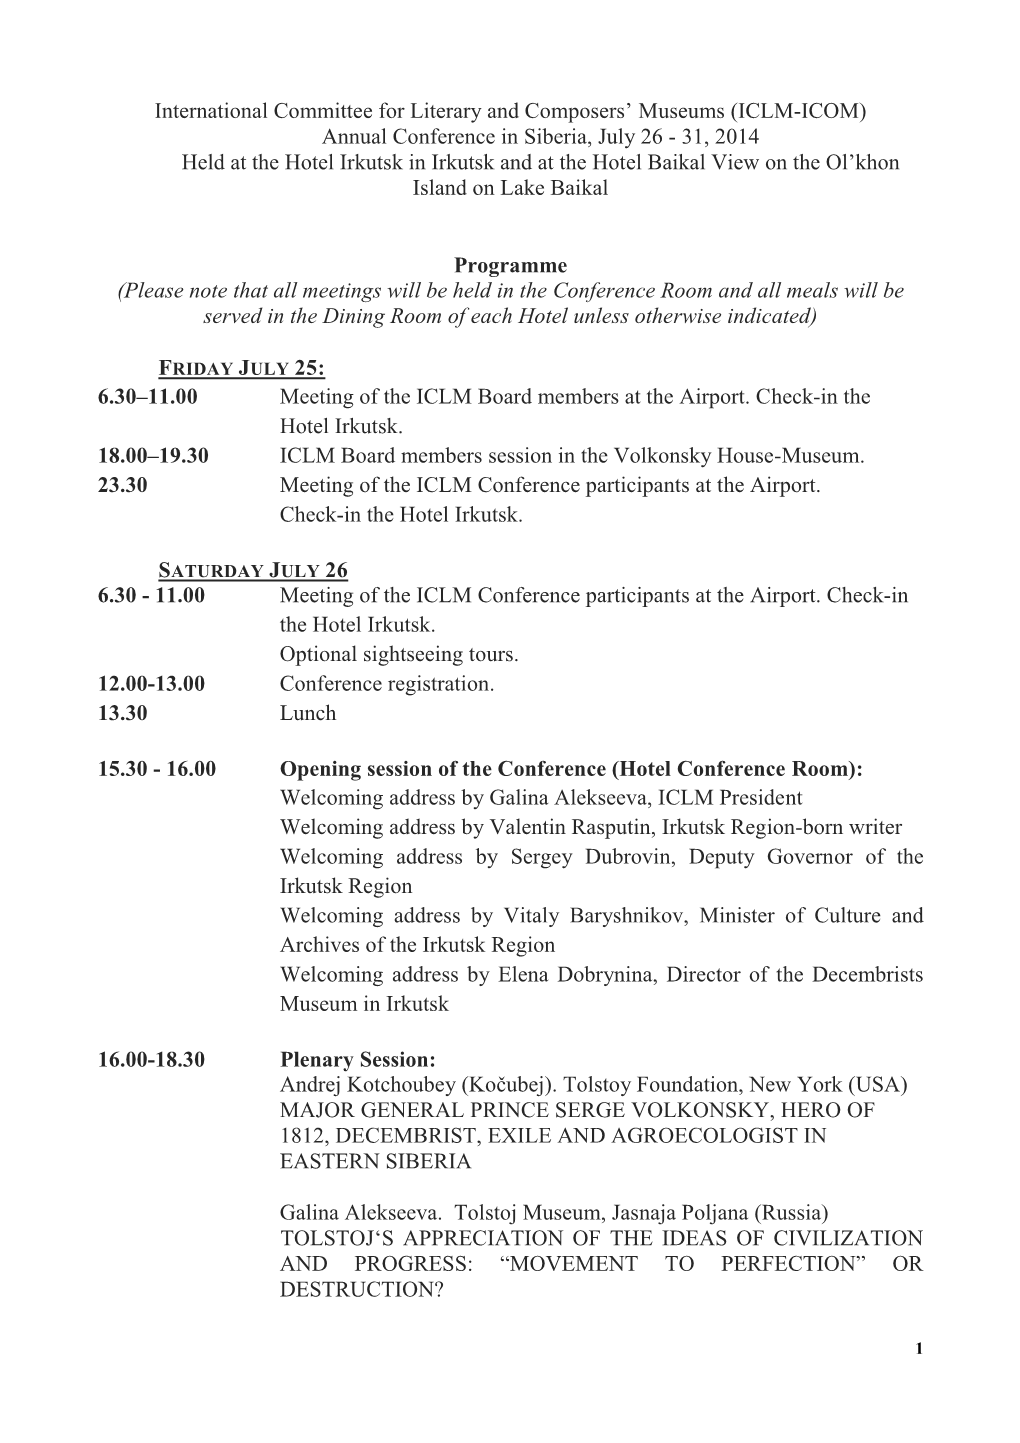 Program of Annual ICLM Conference2014